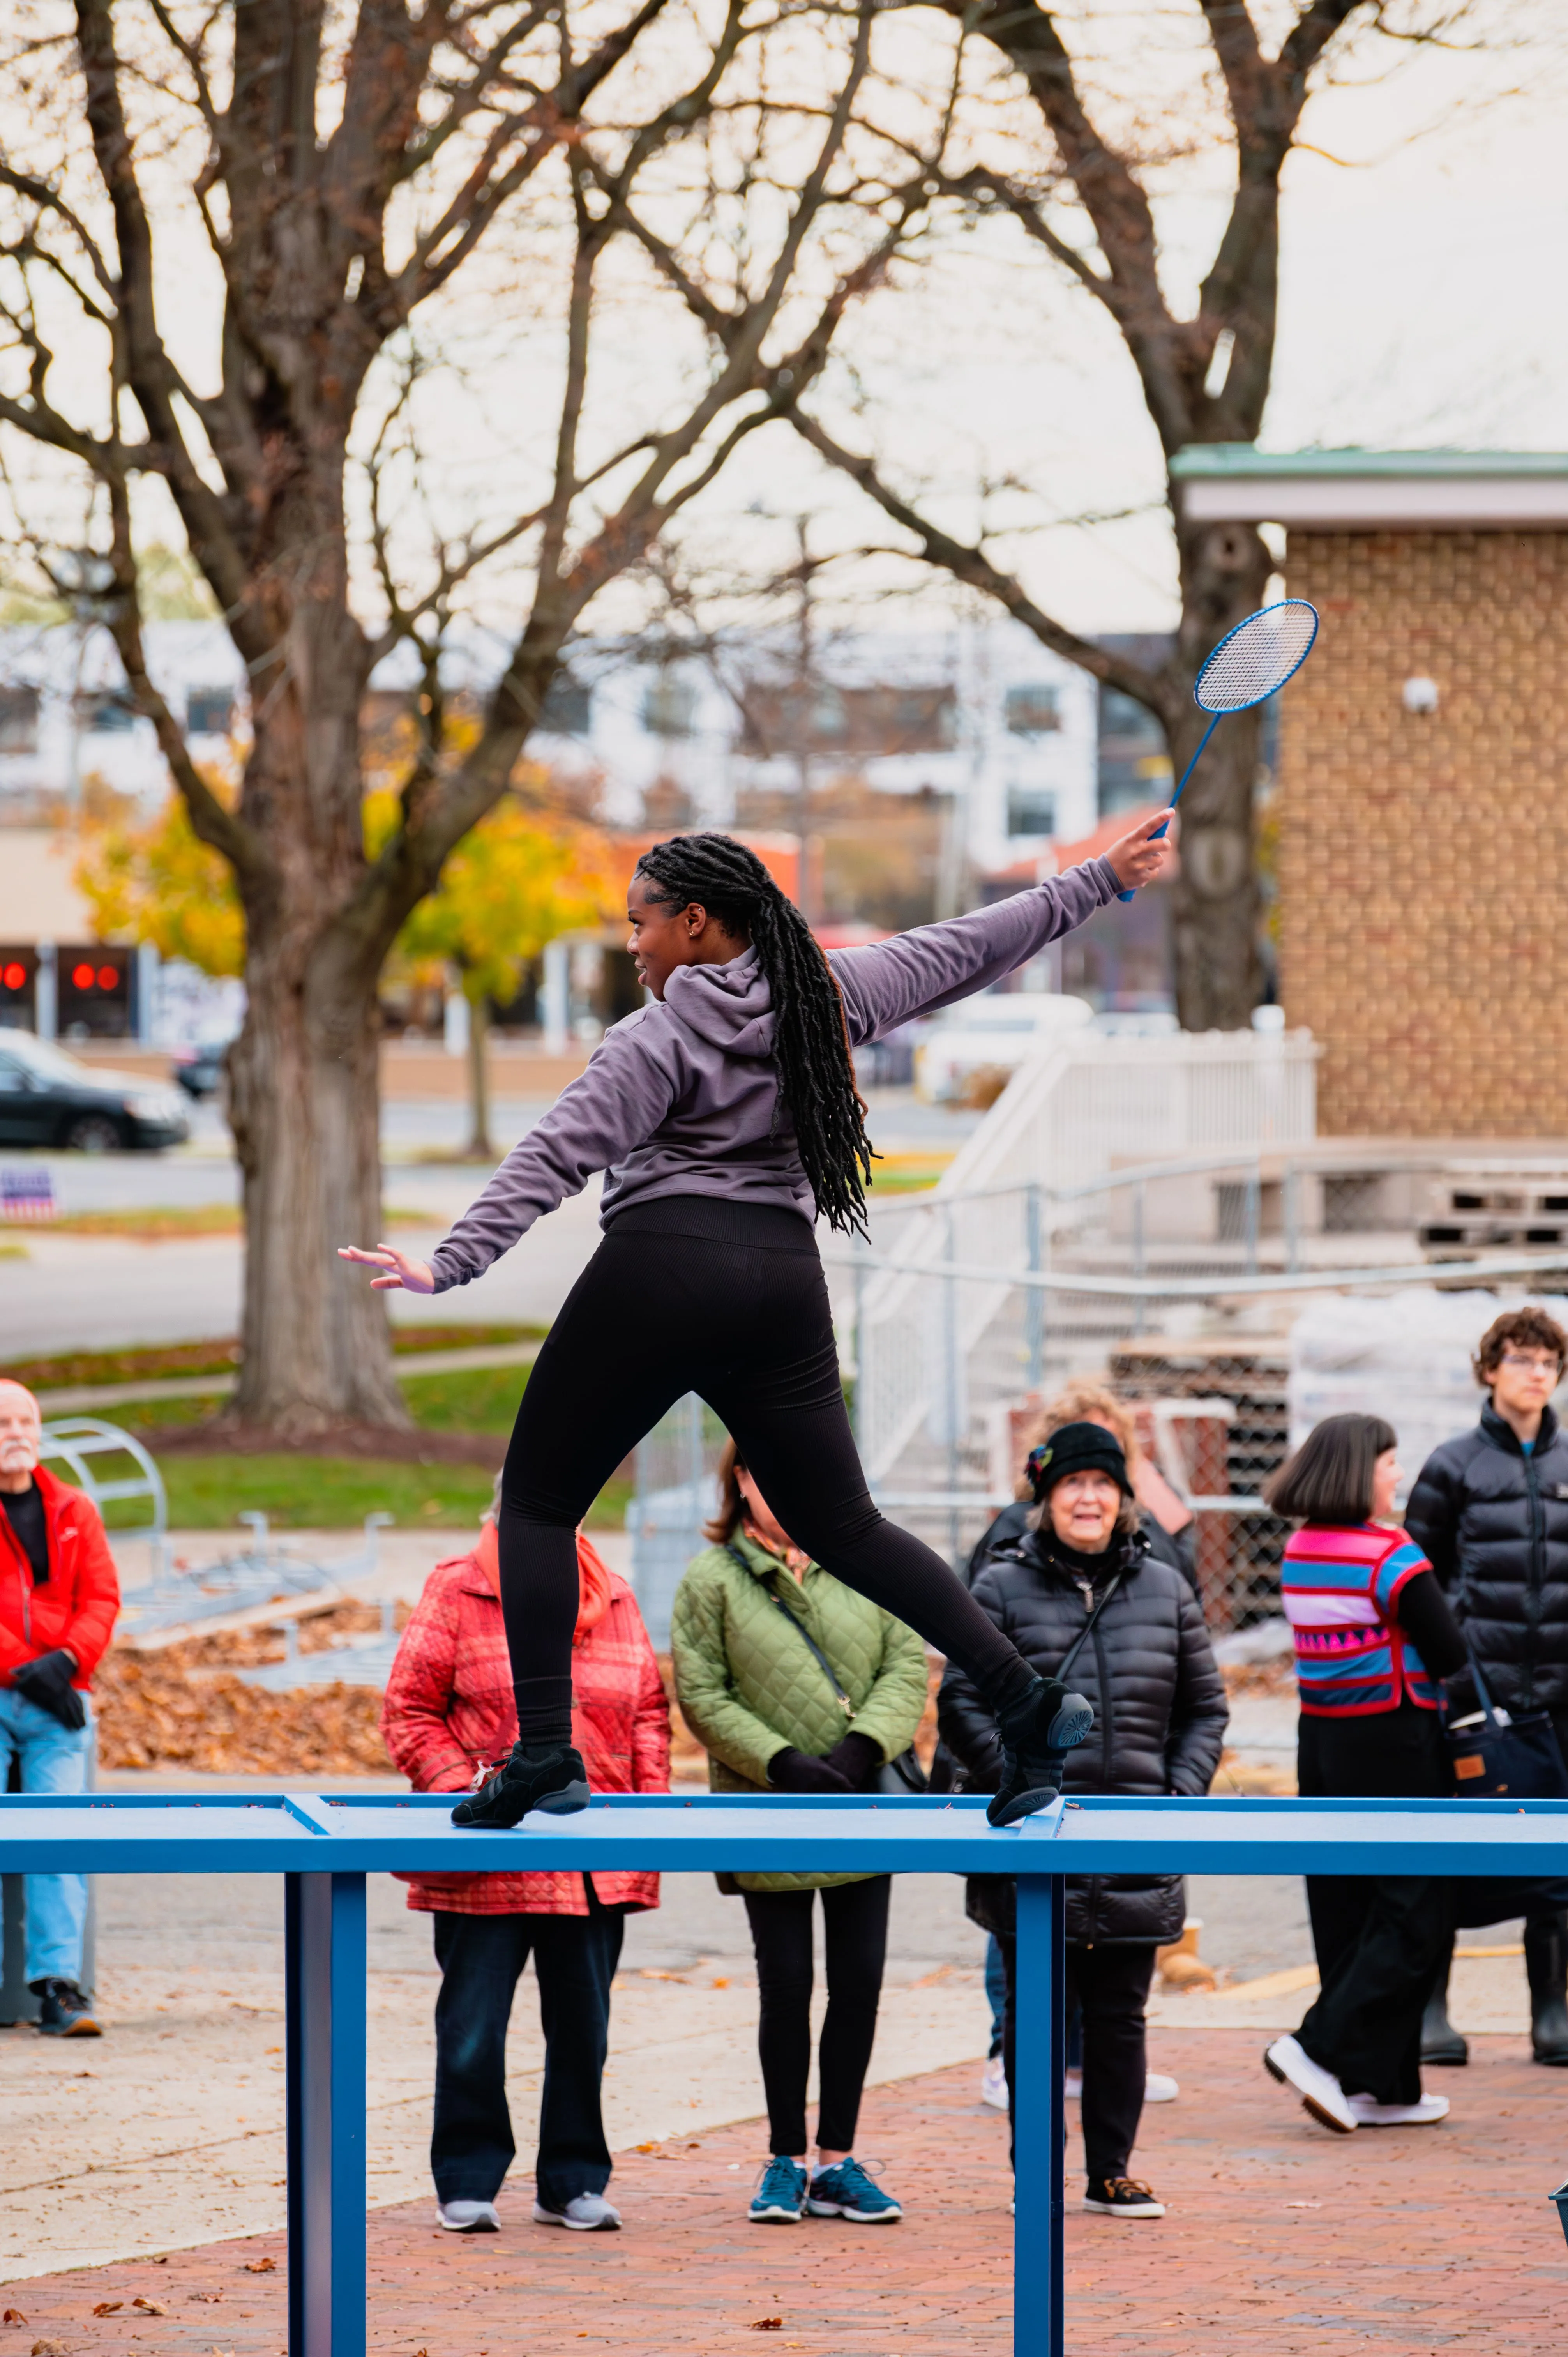 Person balancing on a metal beam in a park with onlookers in the background.